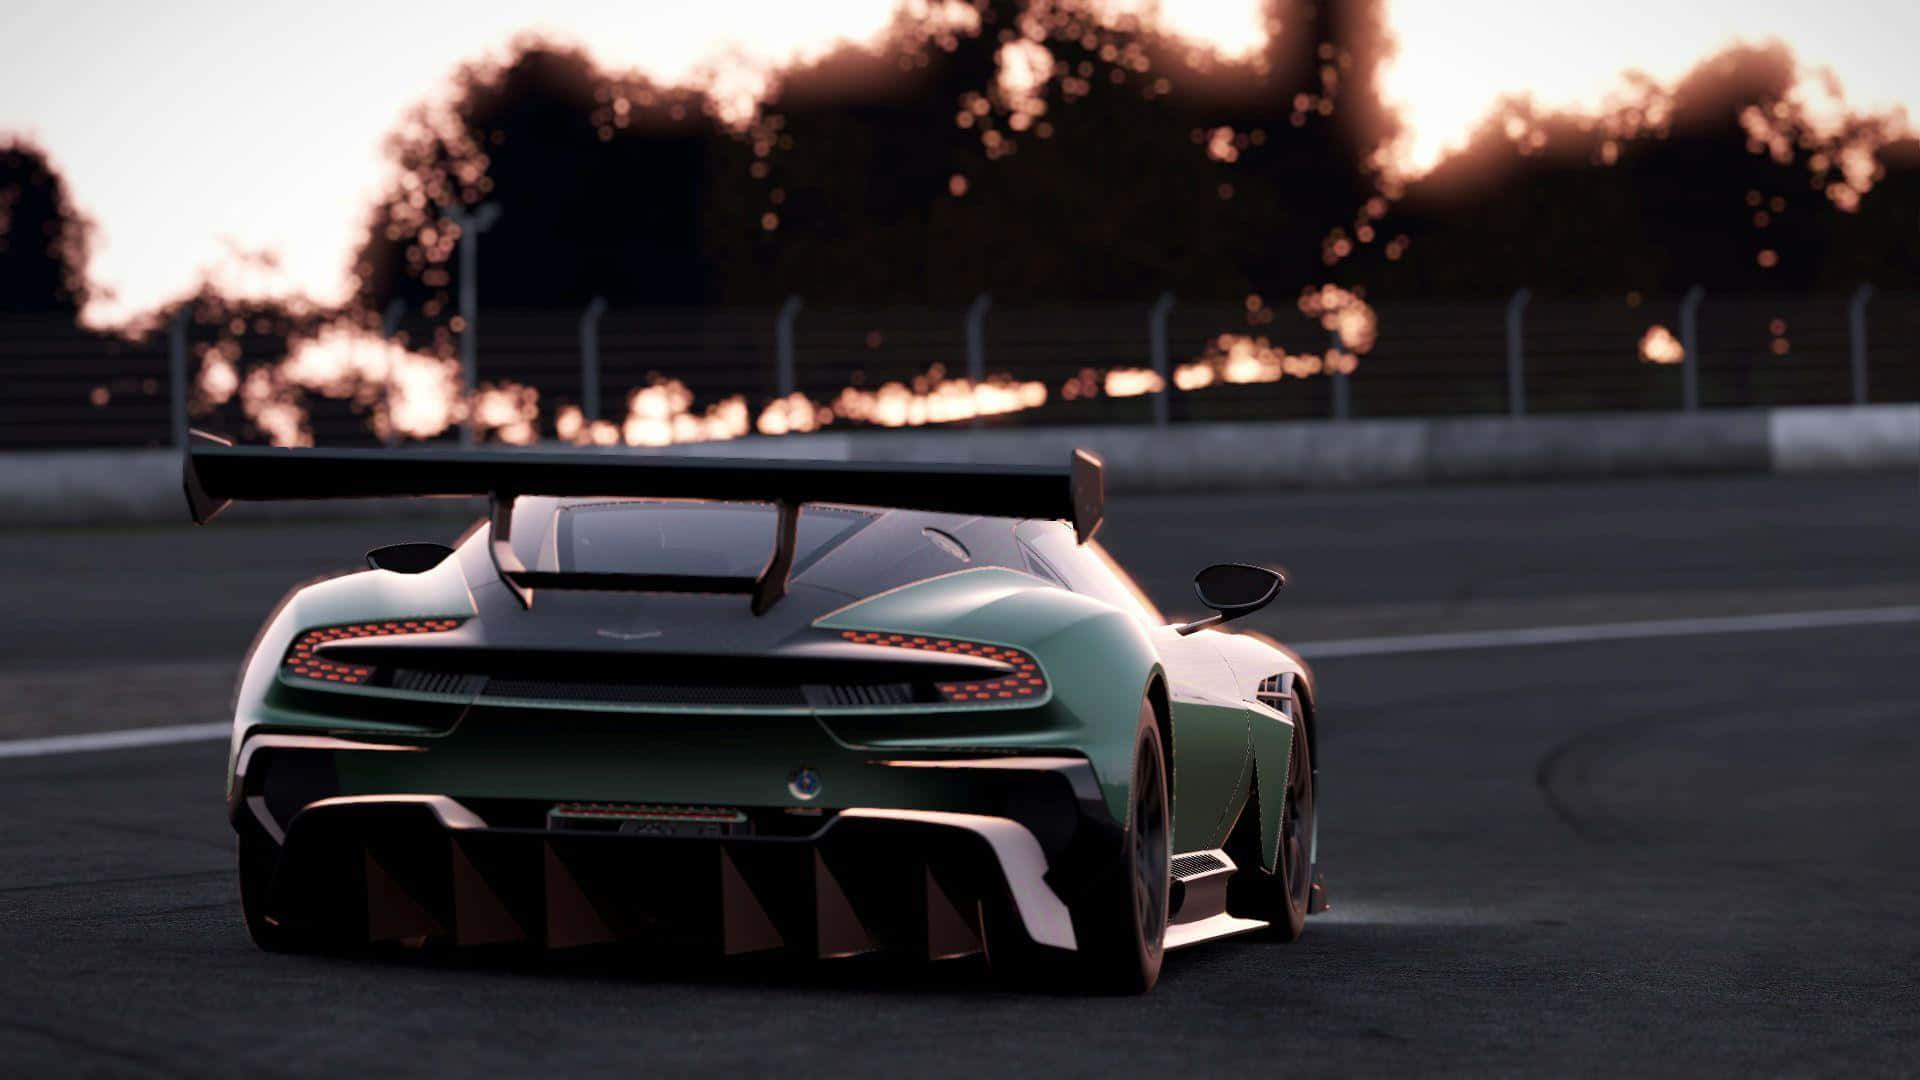 Get Ready to Race in the Highly Ratched World of Best Project Cars 2